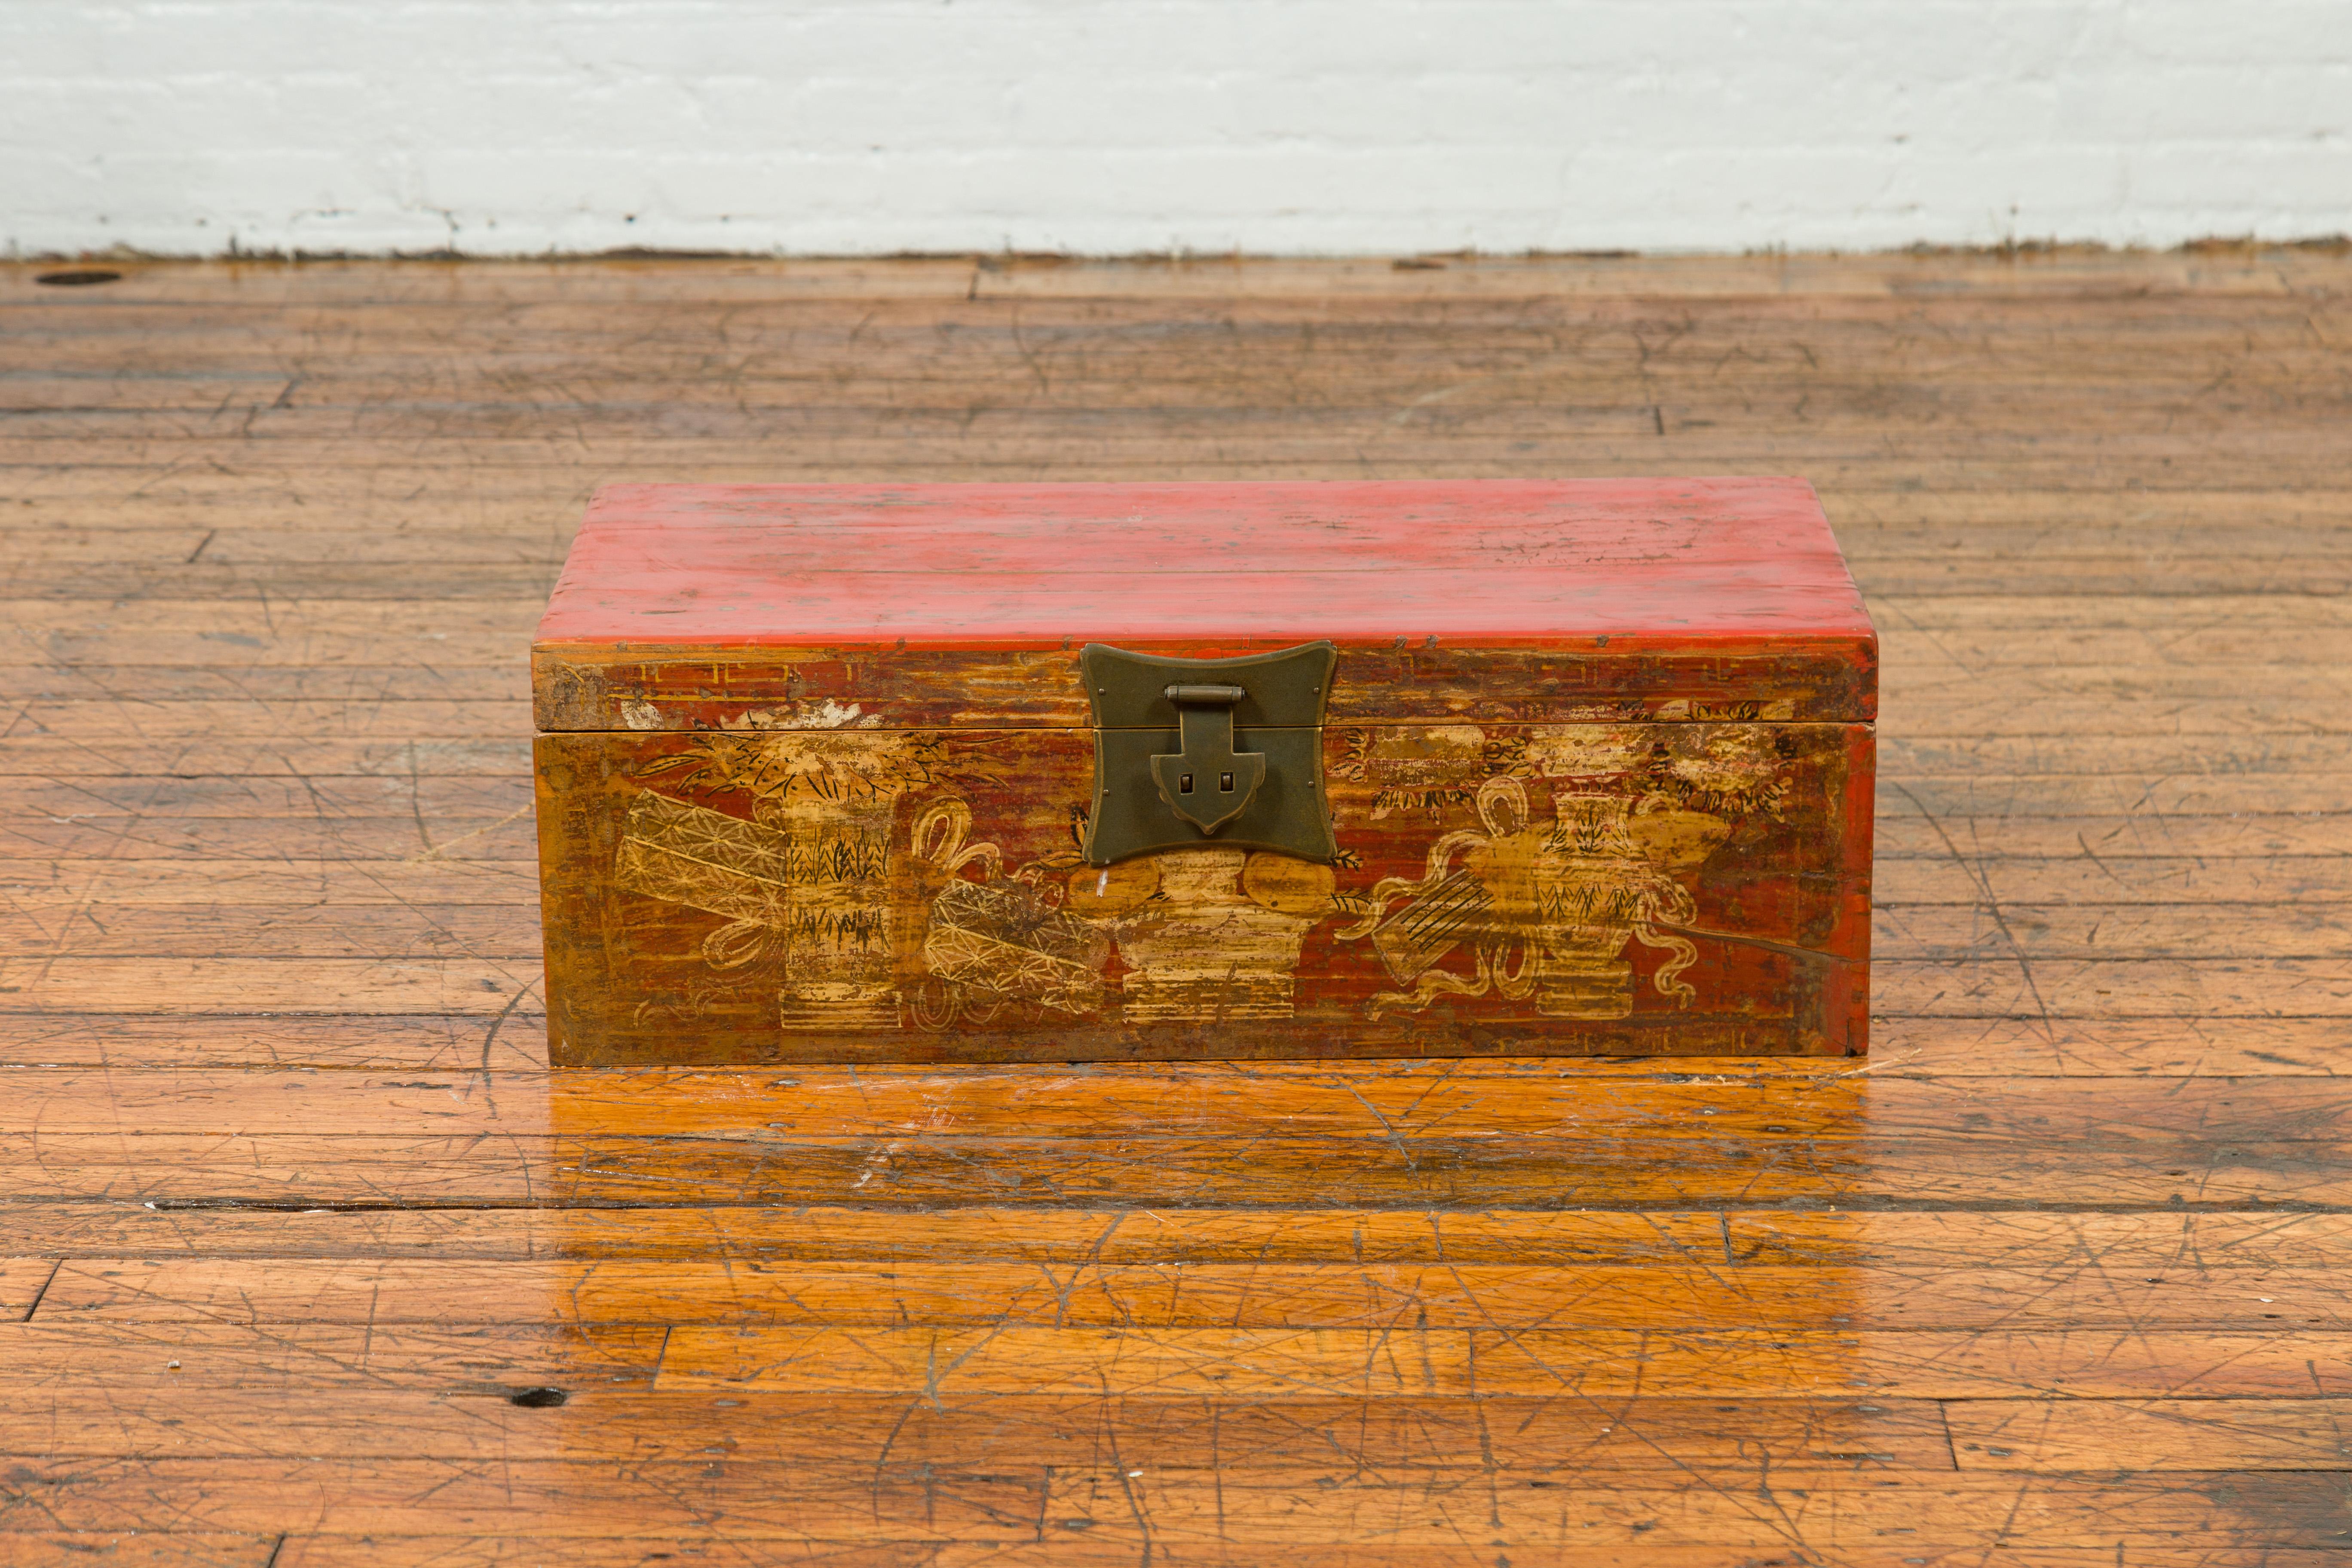 A Chinese vintage red lacquered box from the mid-20th century with golden motifs. Created in China during the midcentury period, this decorative box features a red lacquered ground adorned with golden vases and scrolls in the front. The lid opens